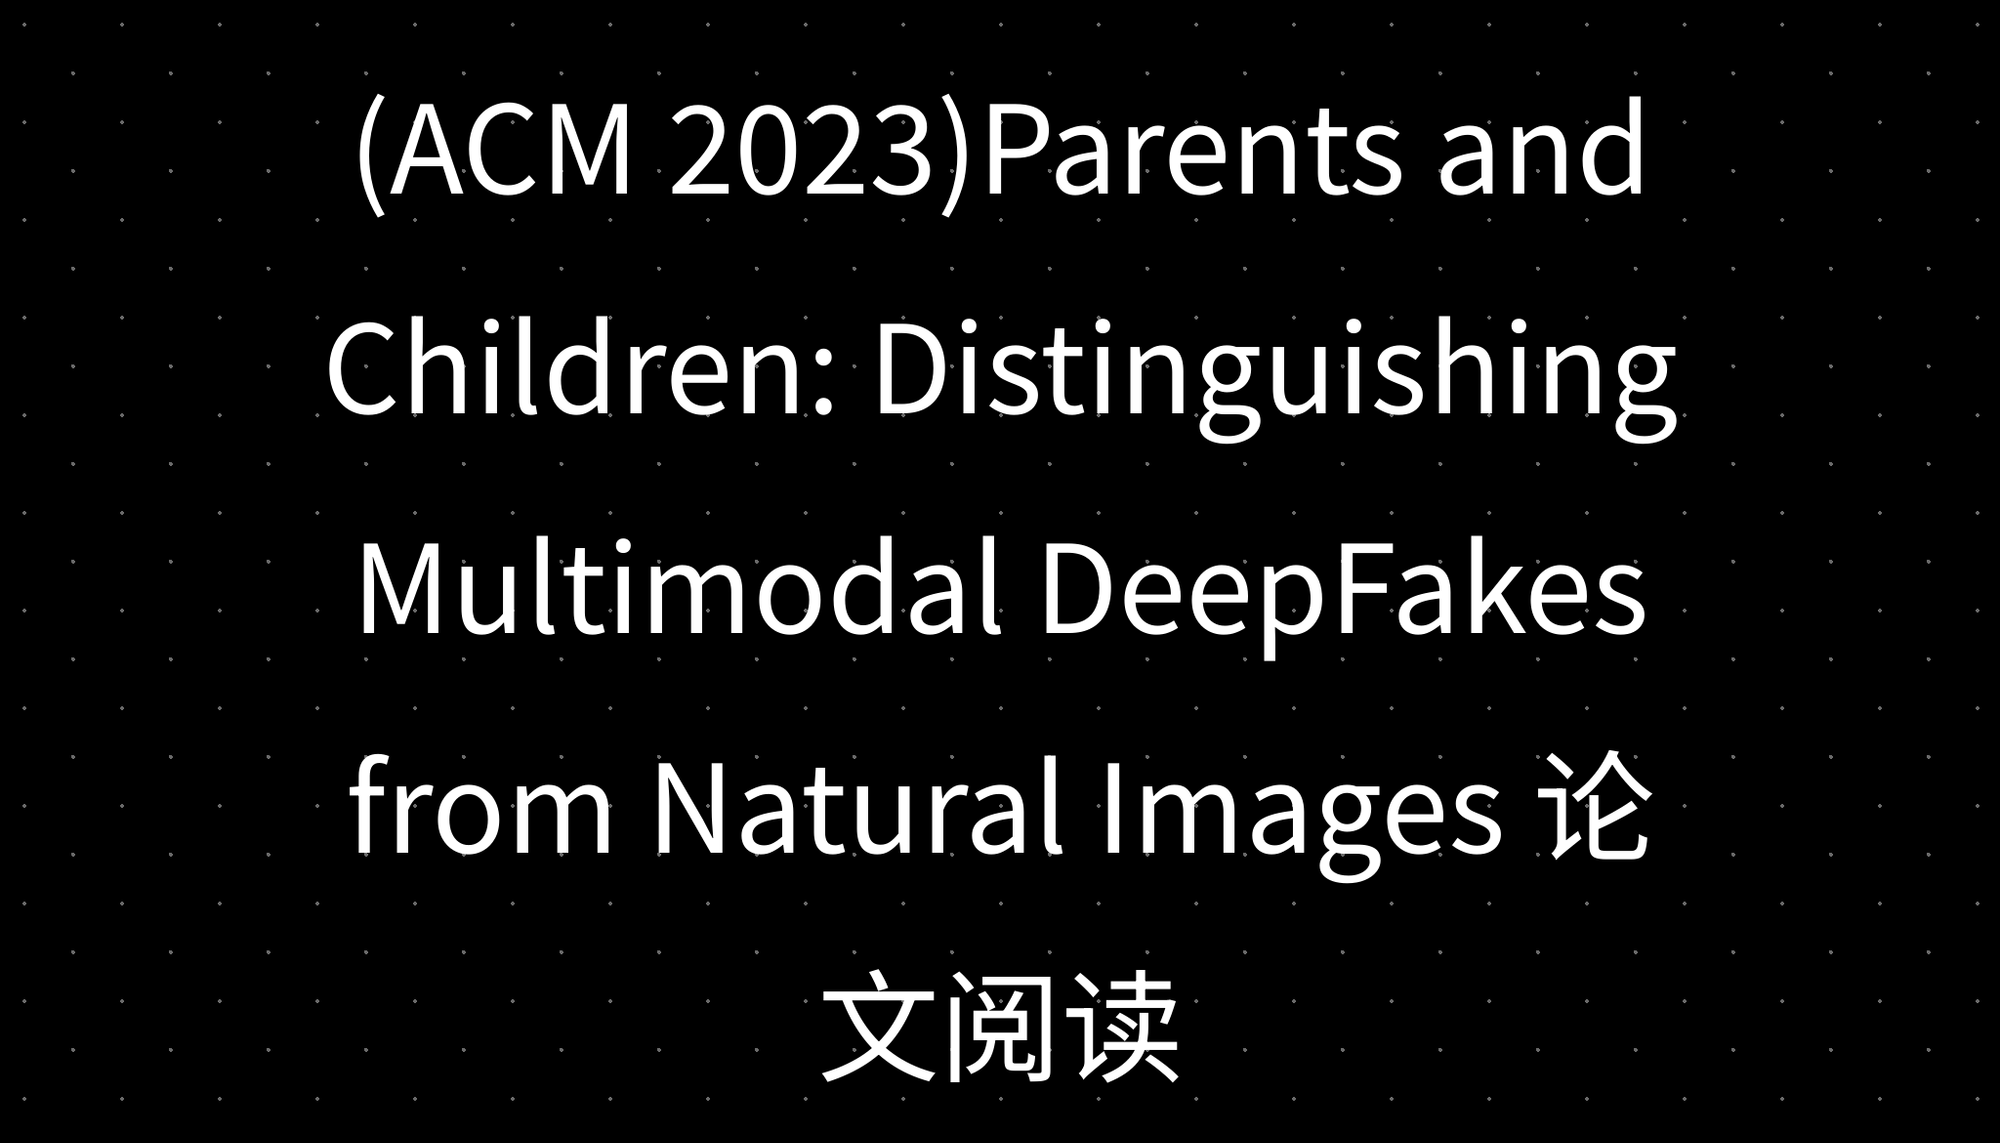 (ACM 2023)Parents and Children: Distinguishing Multimodal DeepFakes from Natural Images 论文阅读